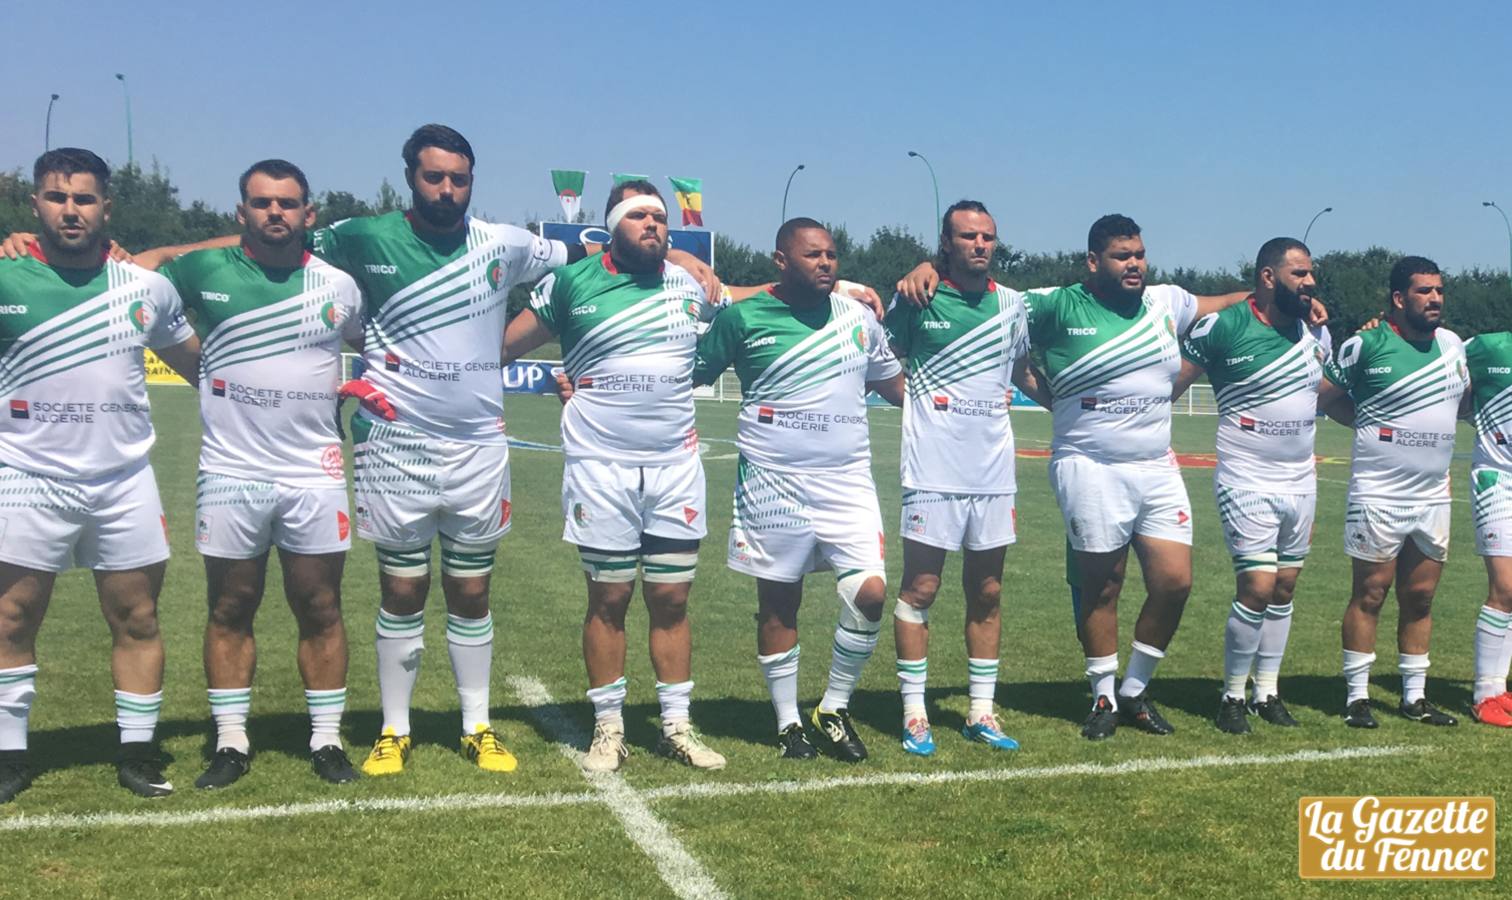 hymne algerie senegal rugby toulouse